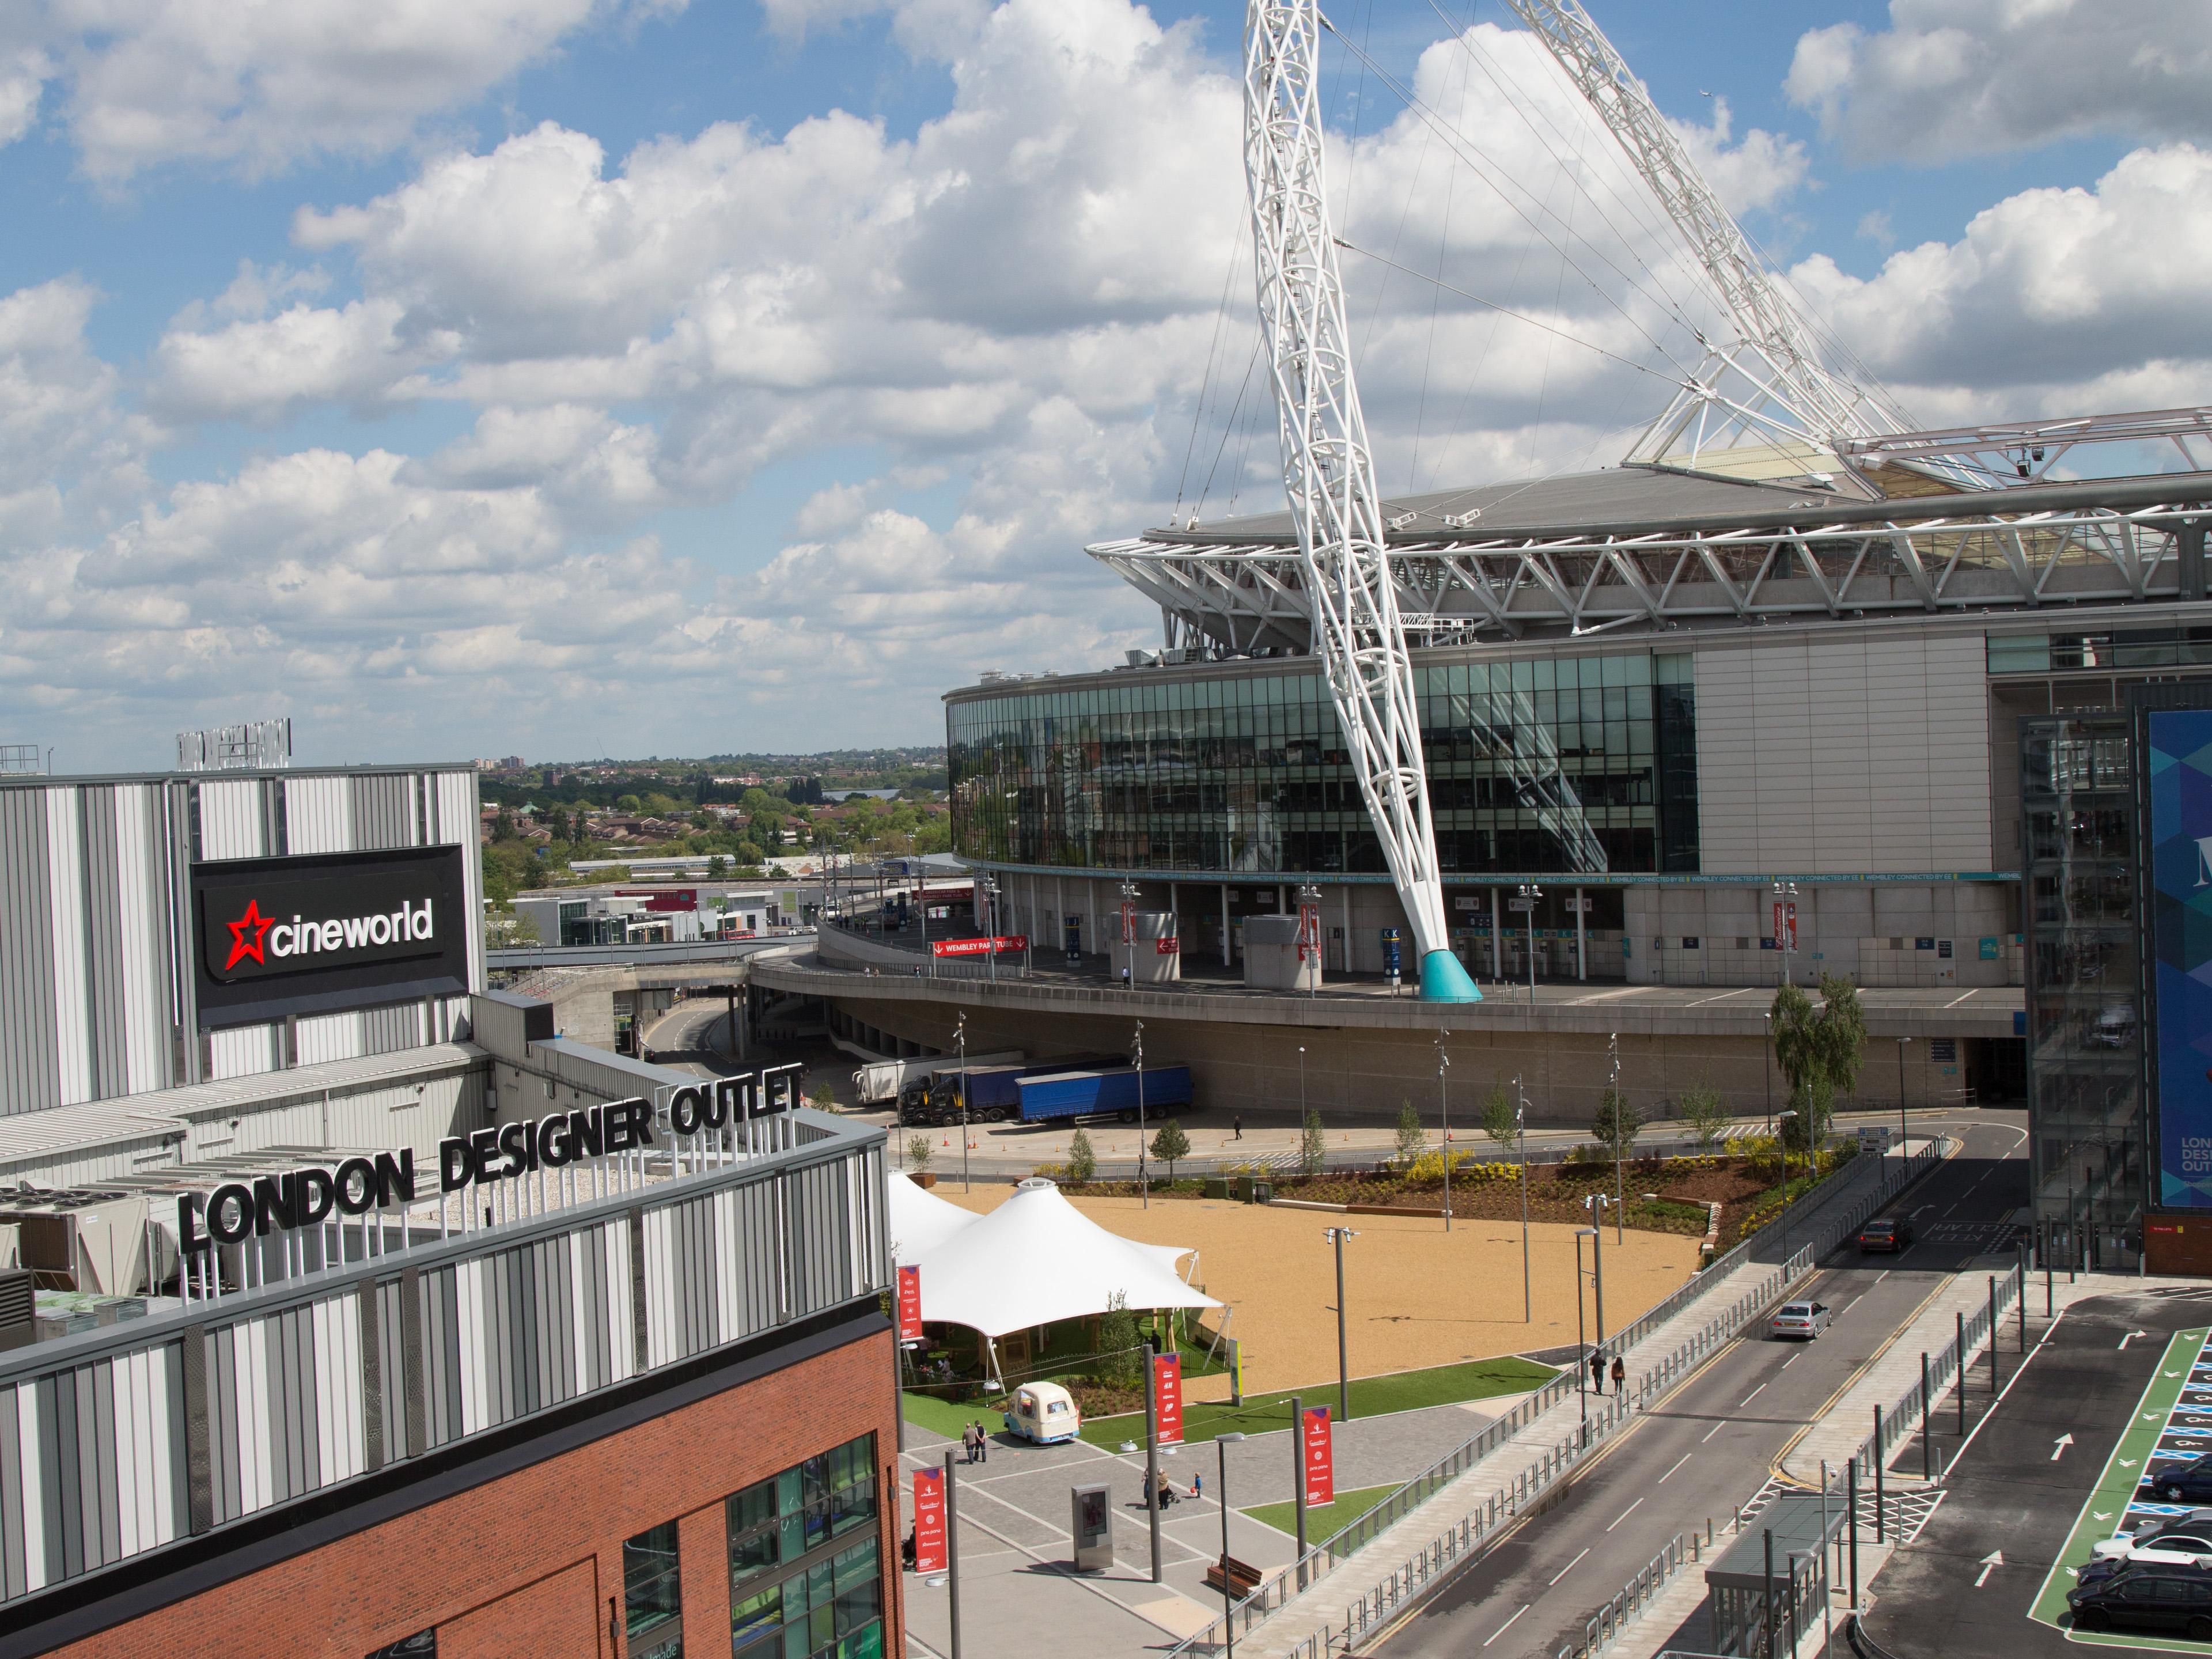 Our Wembley Park location makes us the ideal choice for attending events at The SSE Arena, Wembley Stadium, Troubadour Theatre and shopping at the London Designer Outlet. We have 250 car parking spaces onsite, charges from £15 per 24 hours, events days from £25 per day (11am - 12am) available to non-residents and residents. 